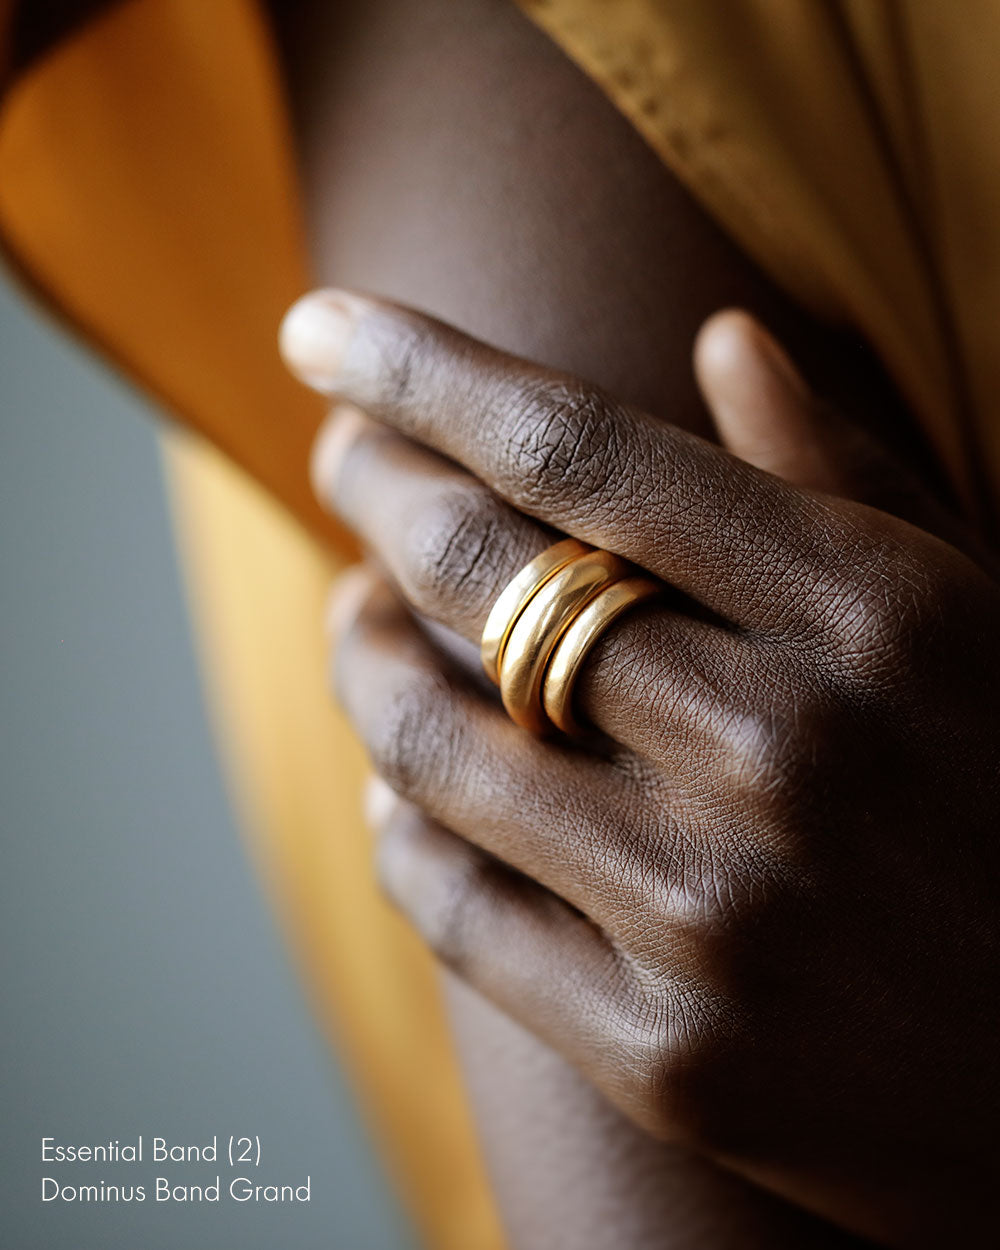 Young black woman wears Large 18k solid yellow gold donut ring on her middle finger.